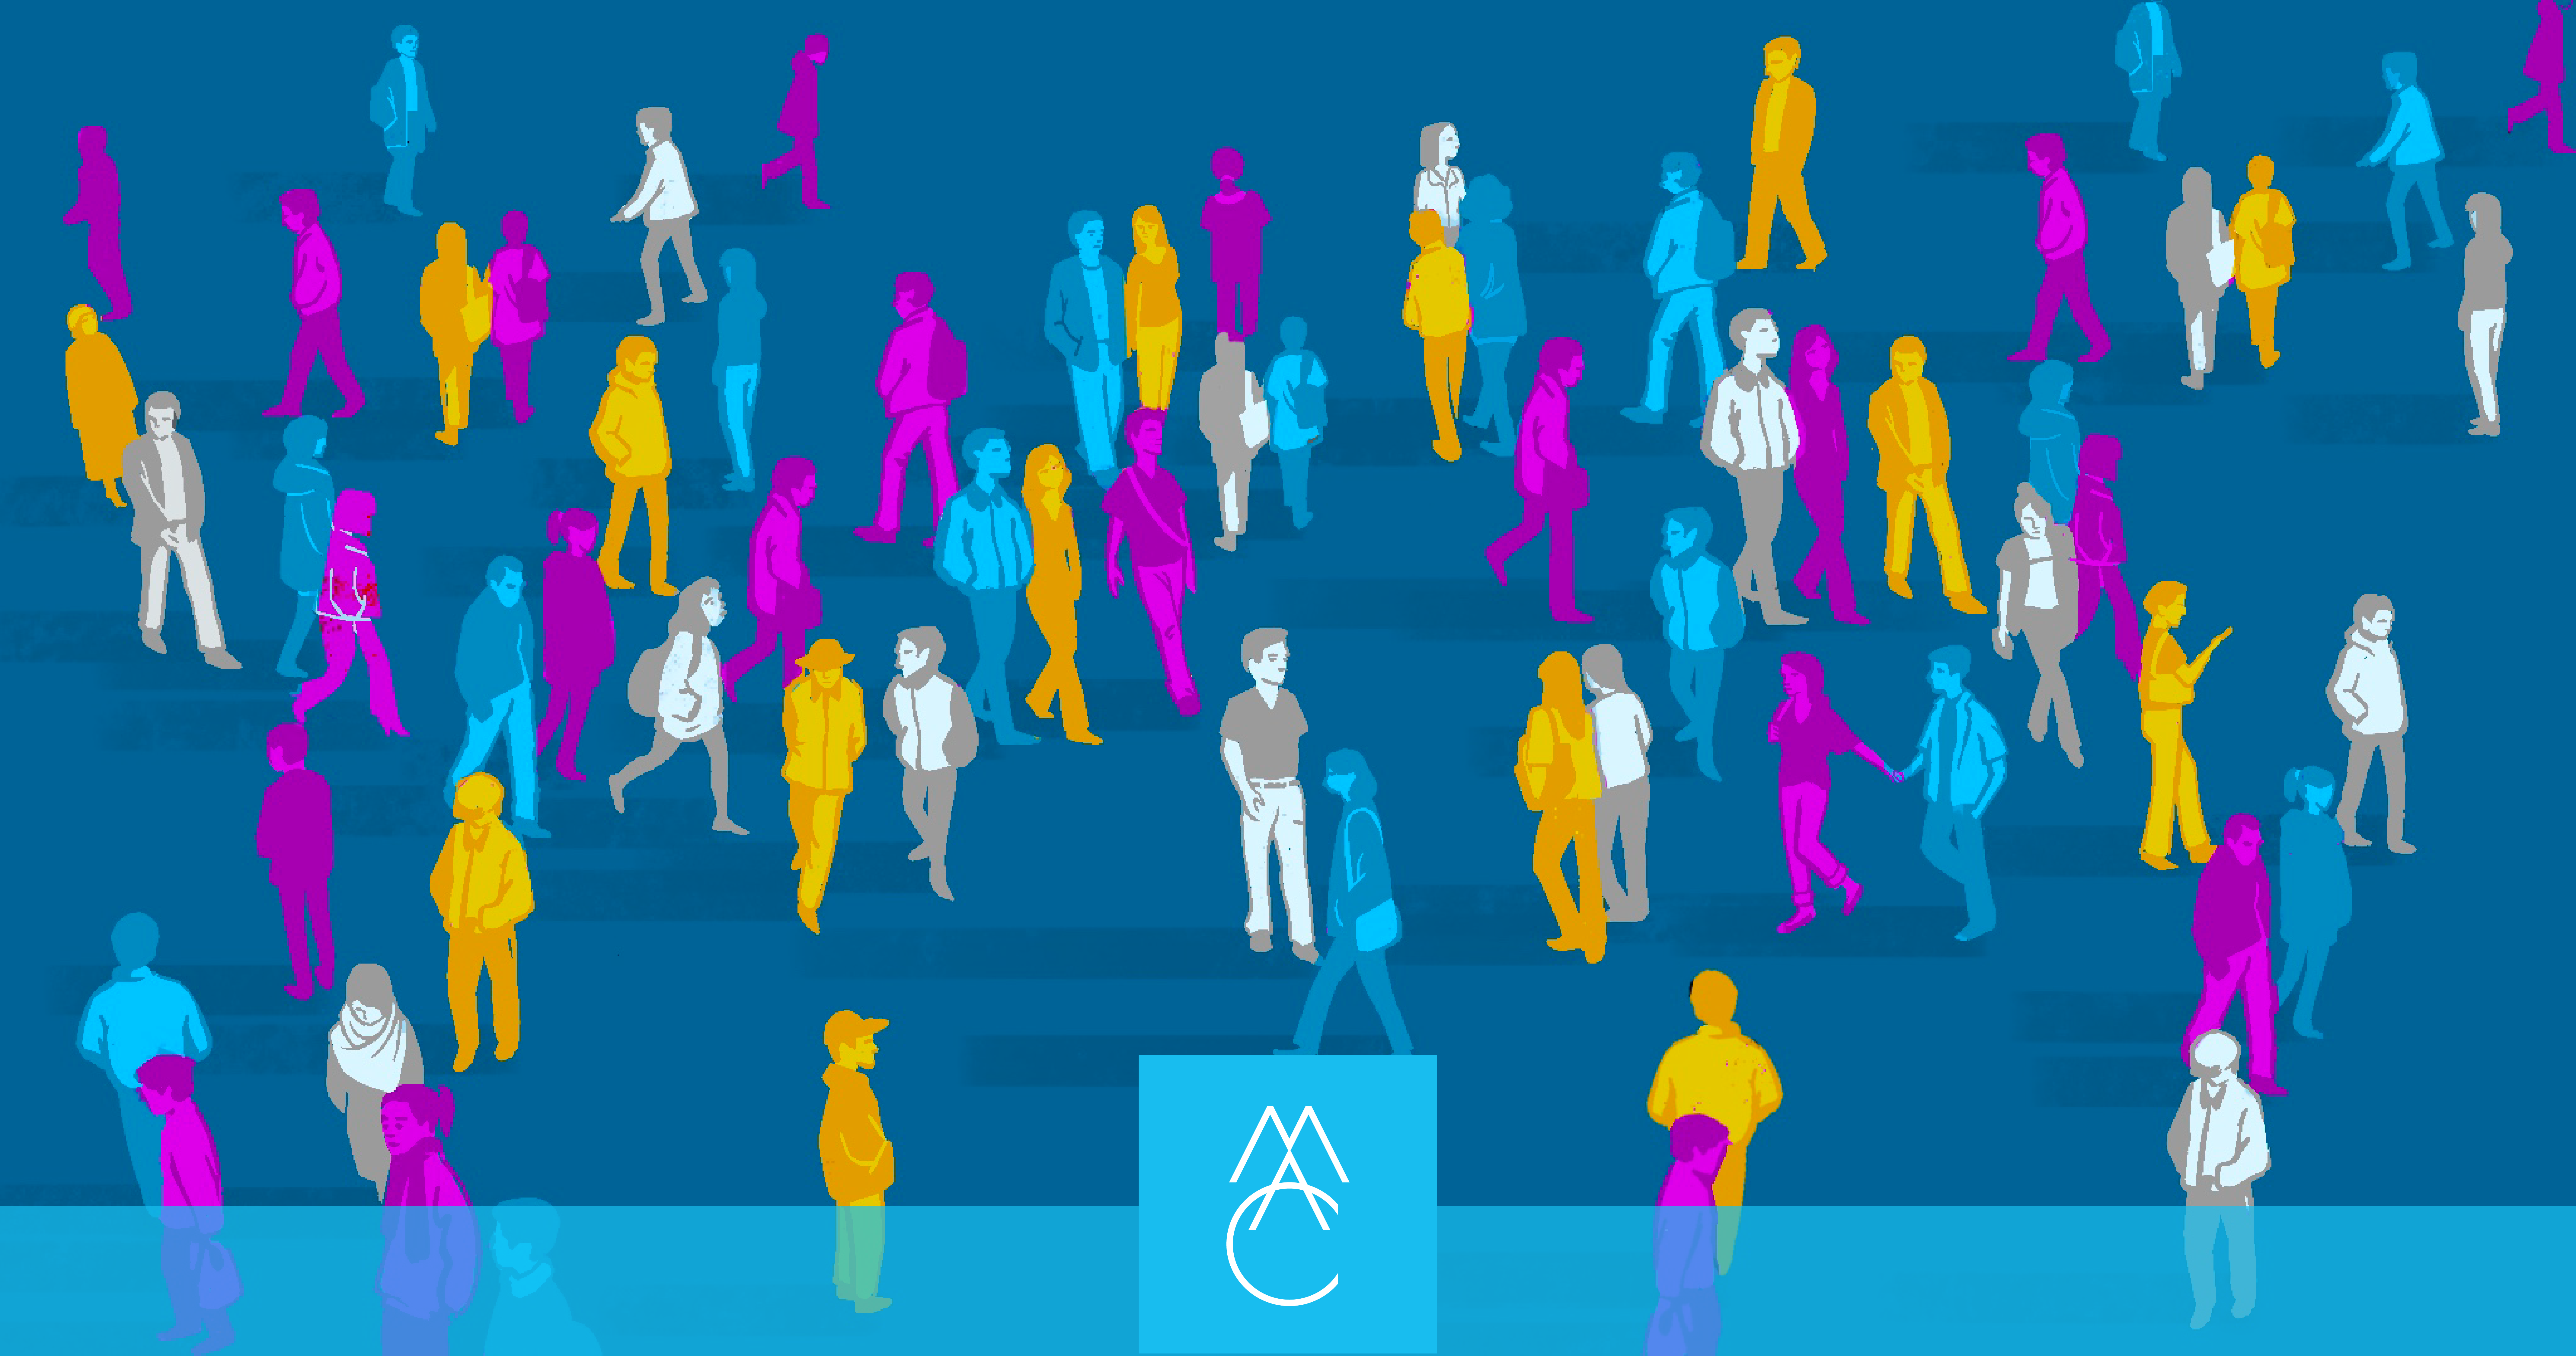 Illustration of people walking in a crowd